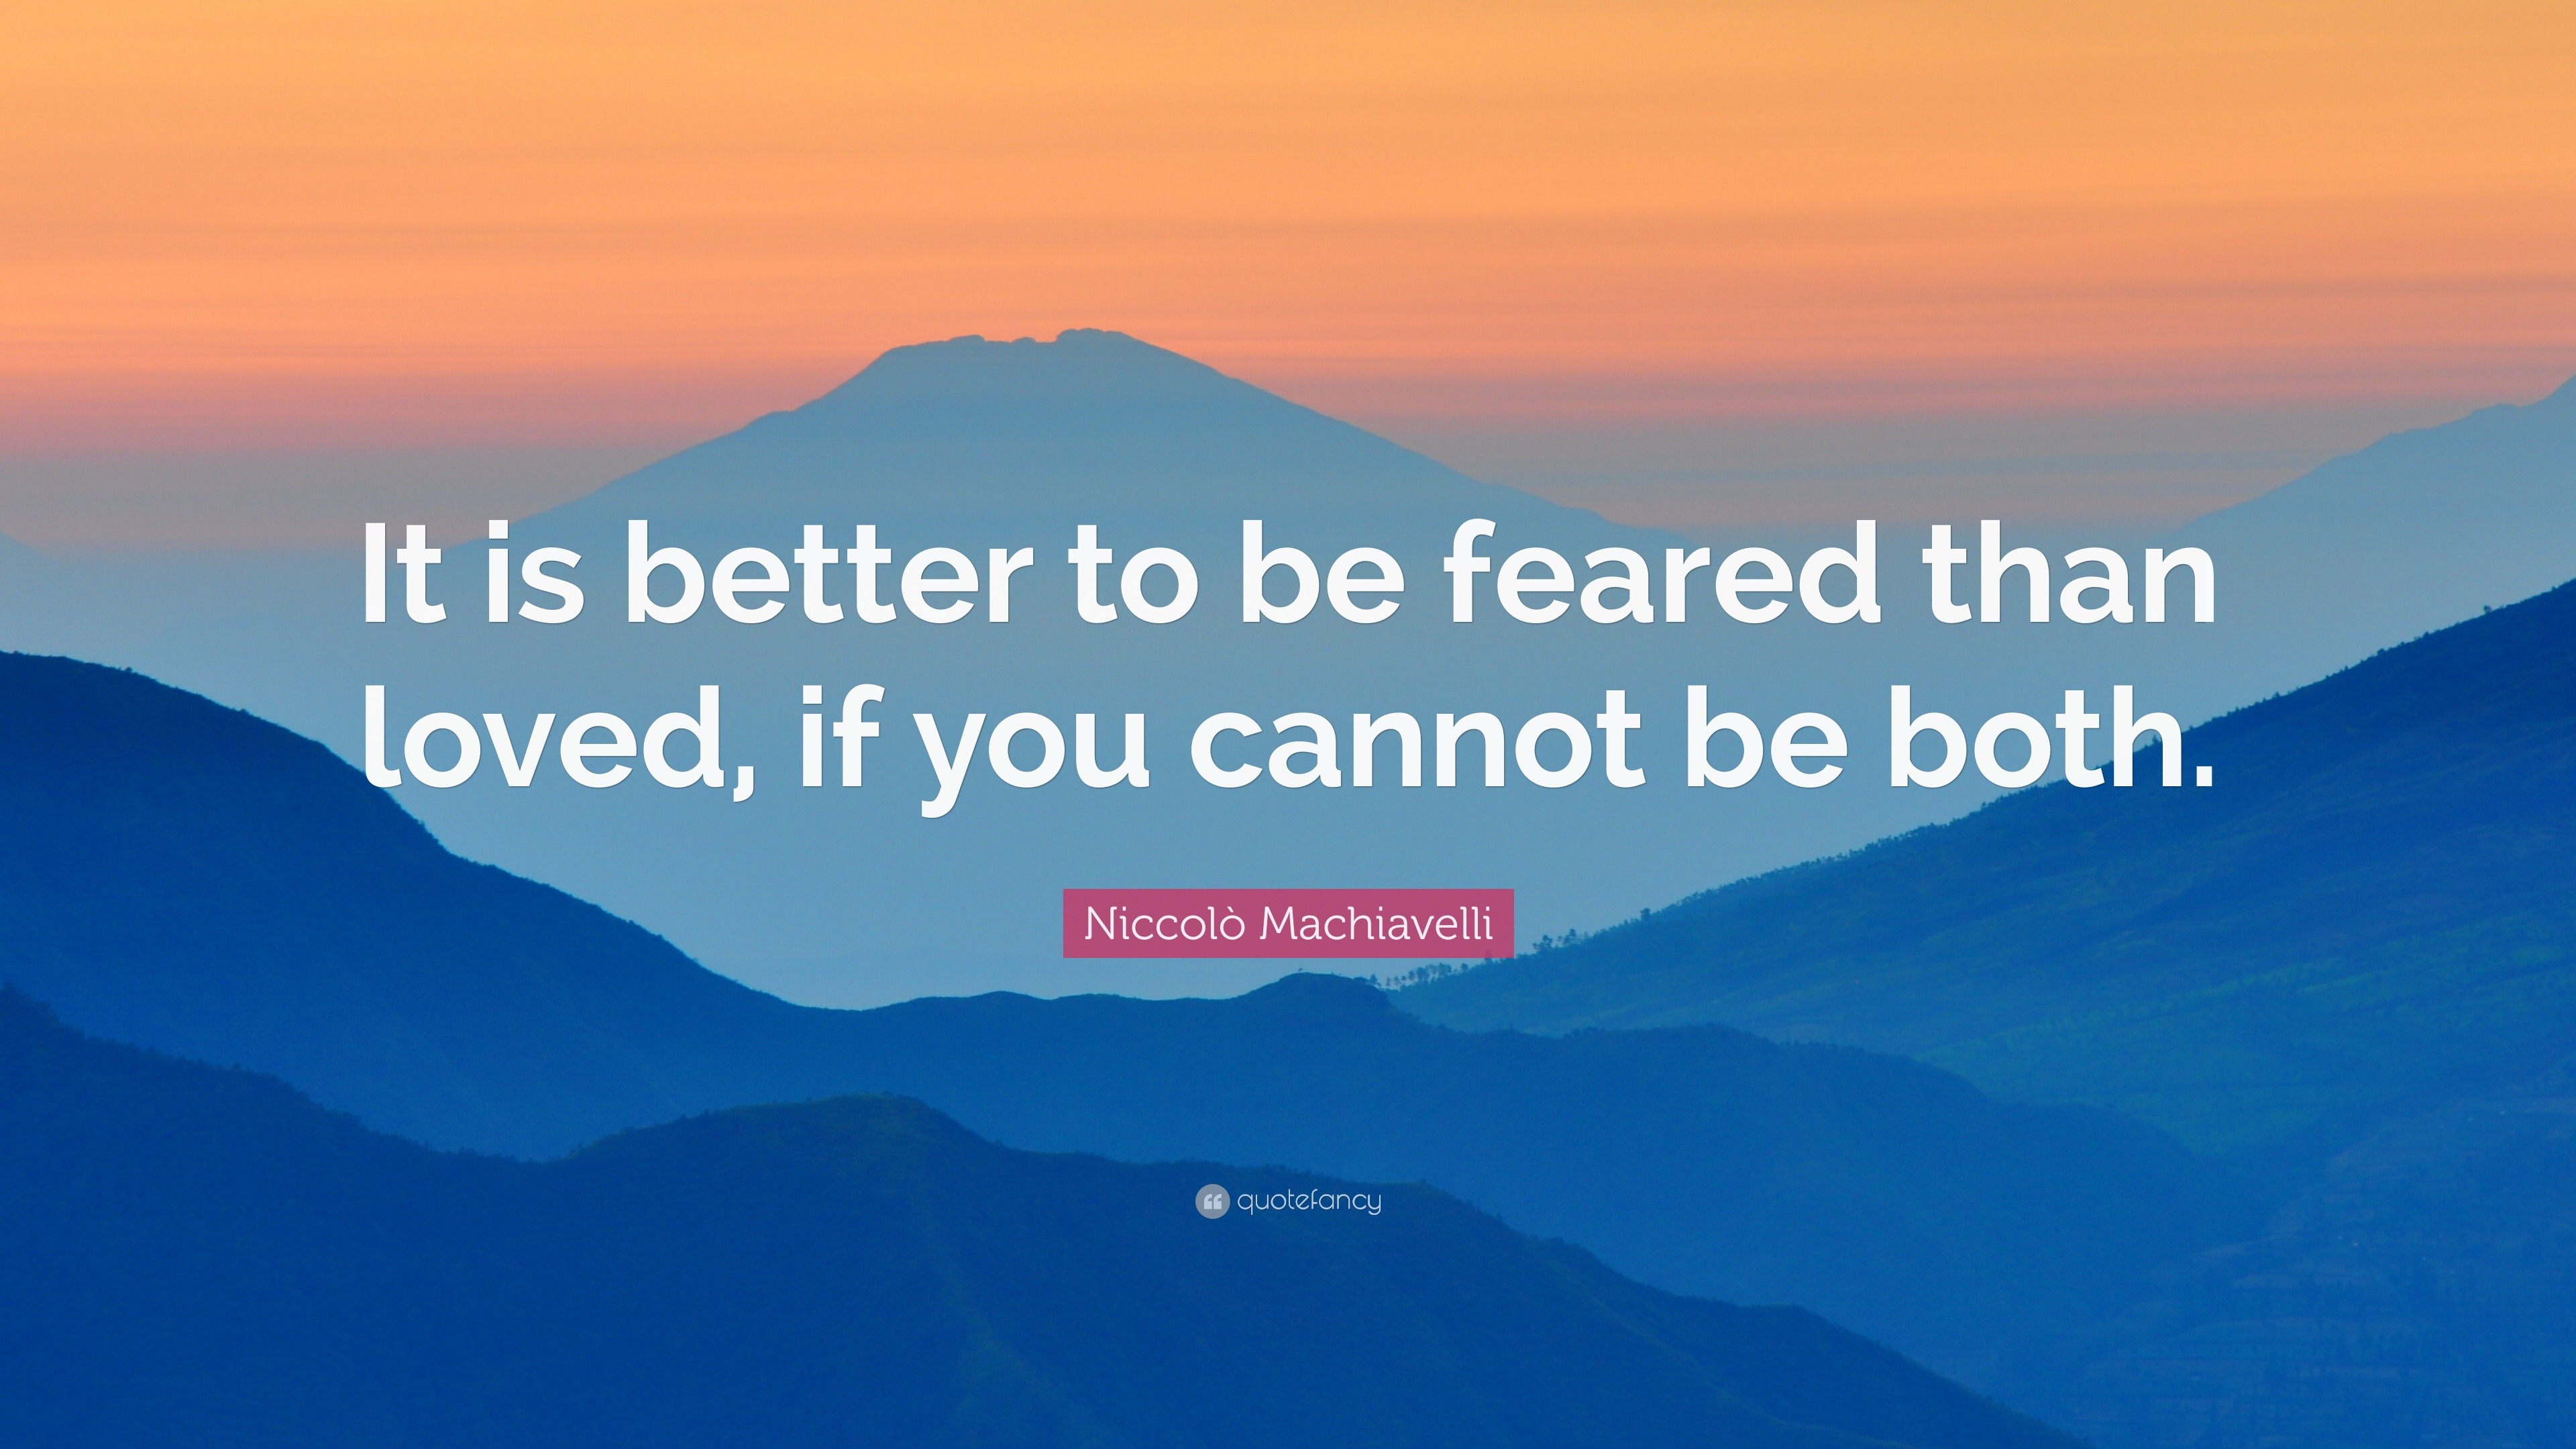 Niccolò Machiavelli Quote: “It is better to be feared than loved, if